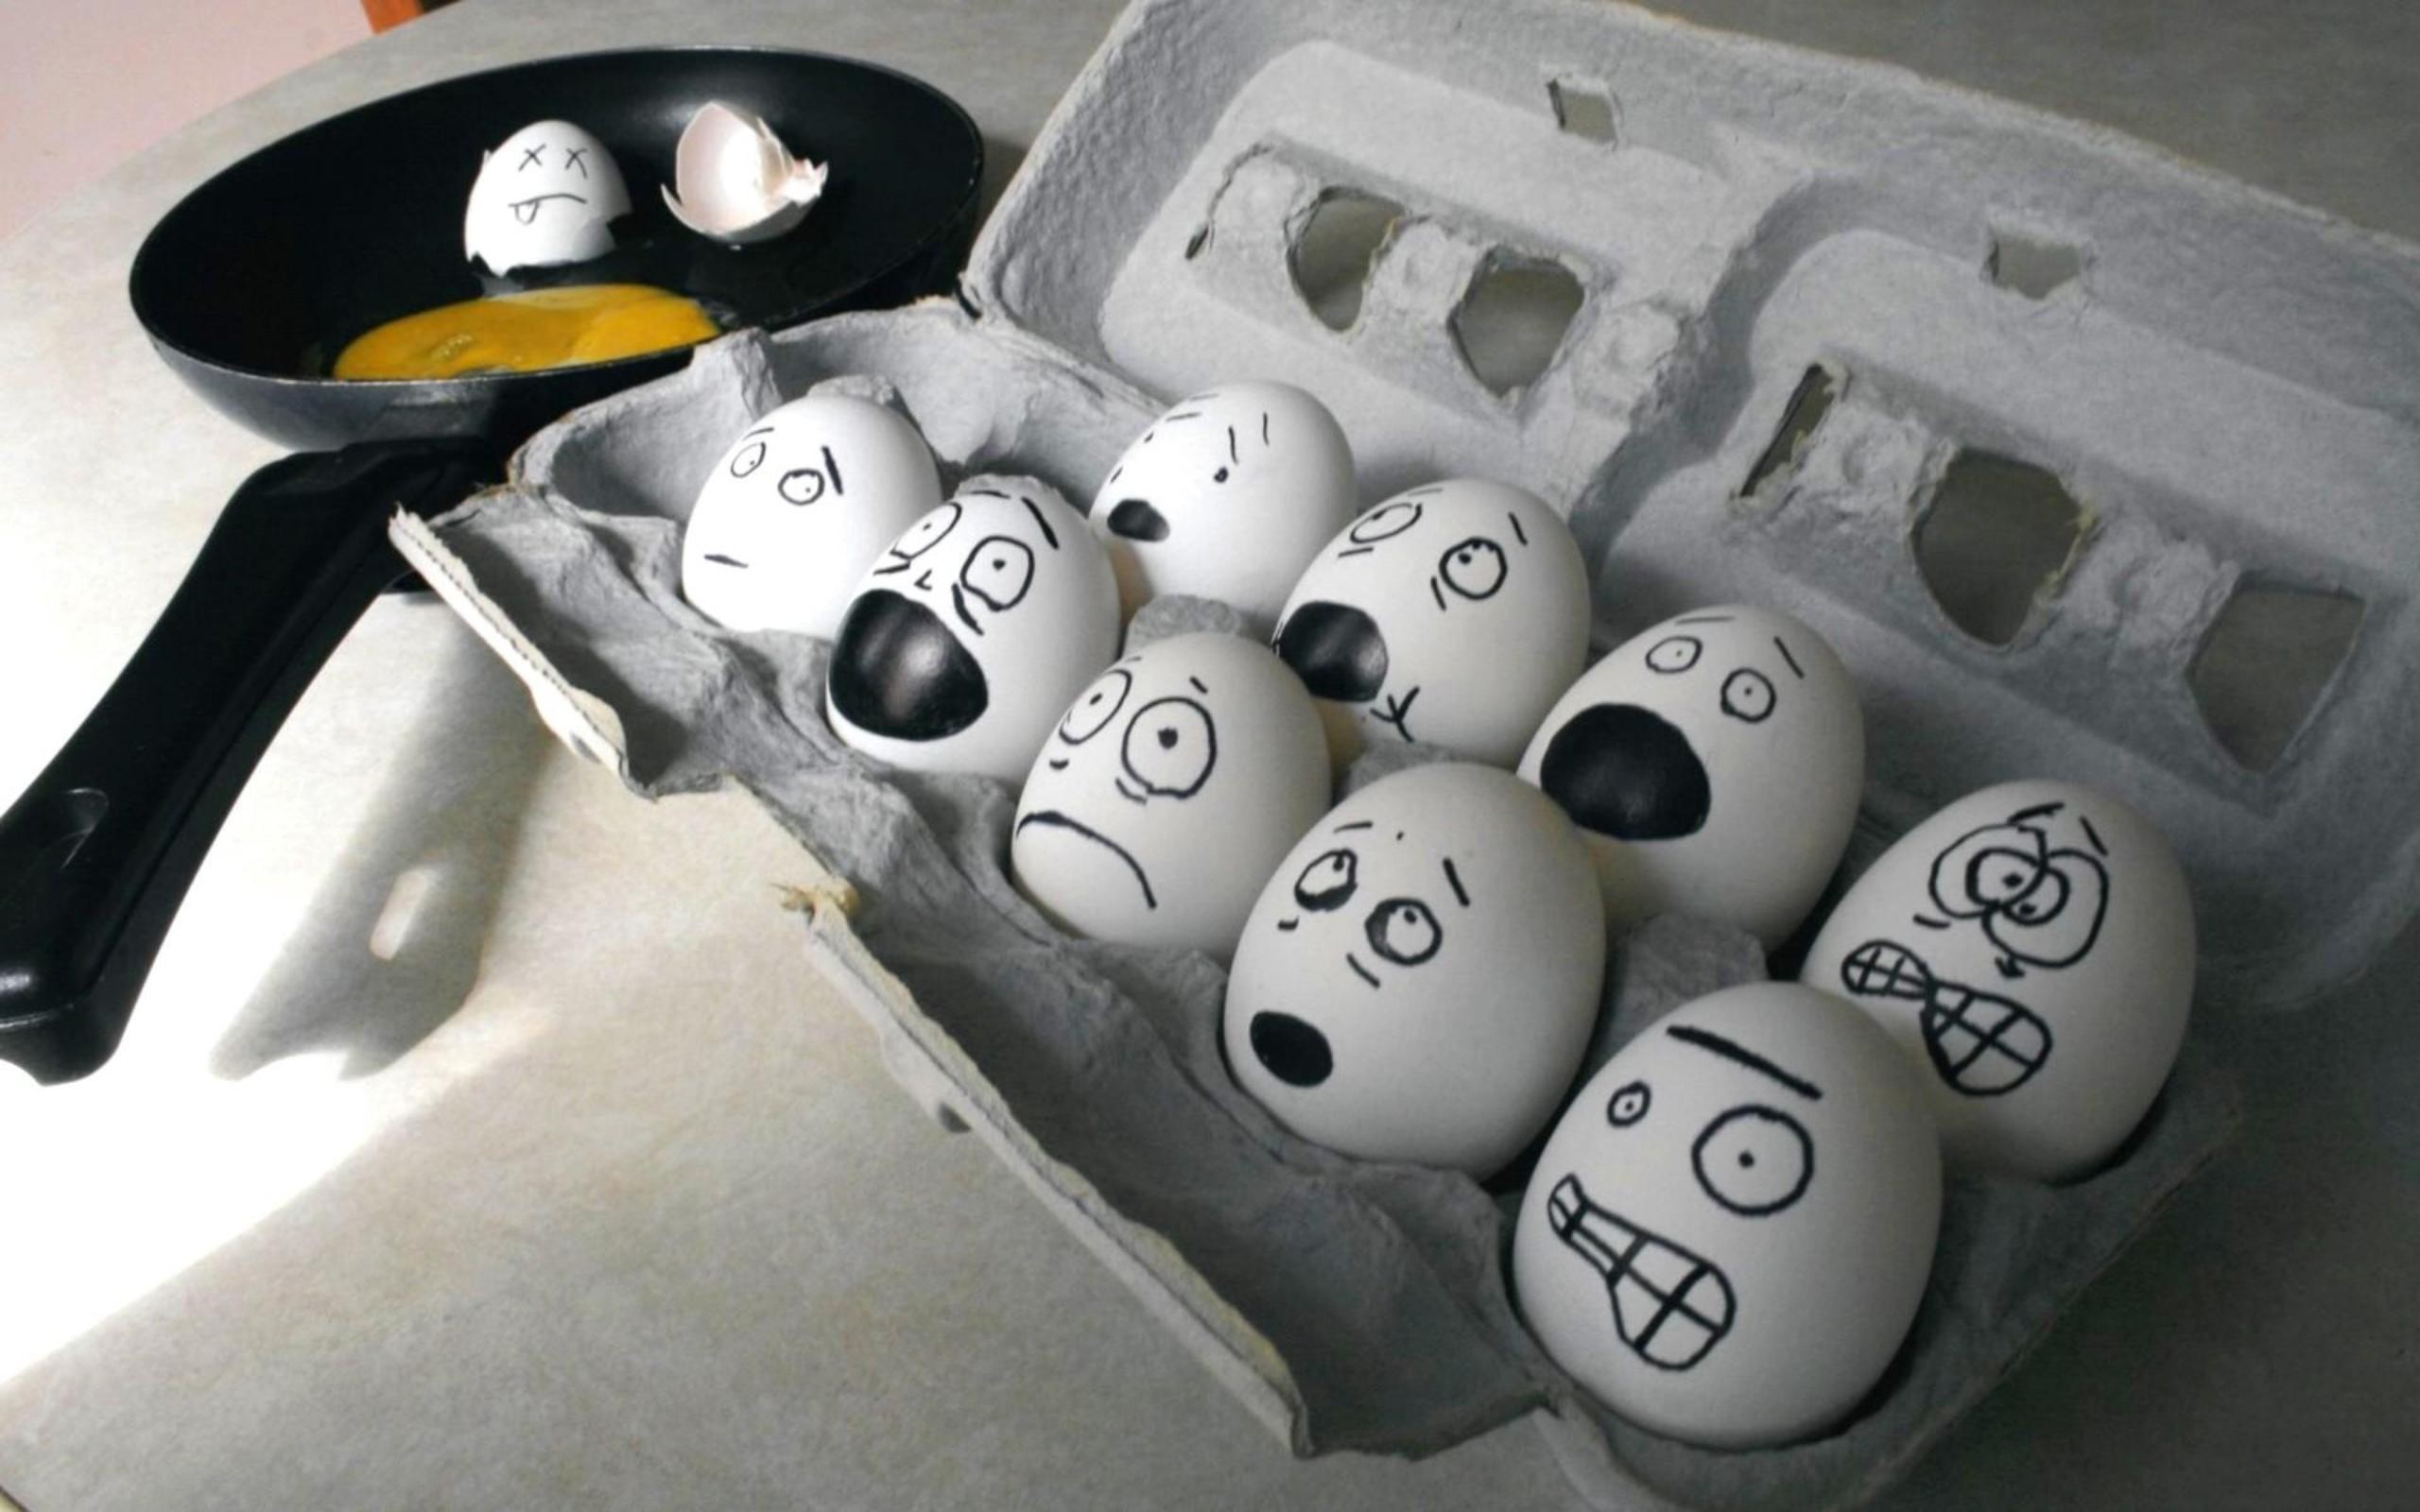 eggs, Food, Groups, Kitchen, Animation, Murder, Pan, Satire, Drawings, Emoticons, Kill, Fun, Fried, Eggs Wallpaper